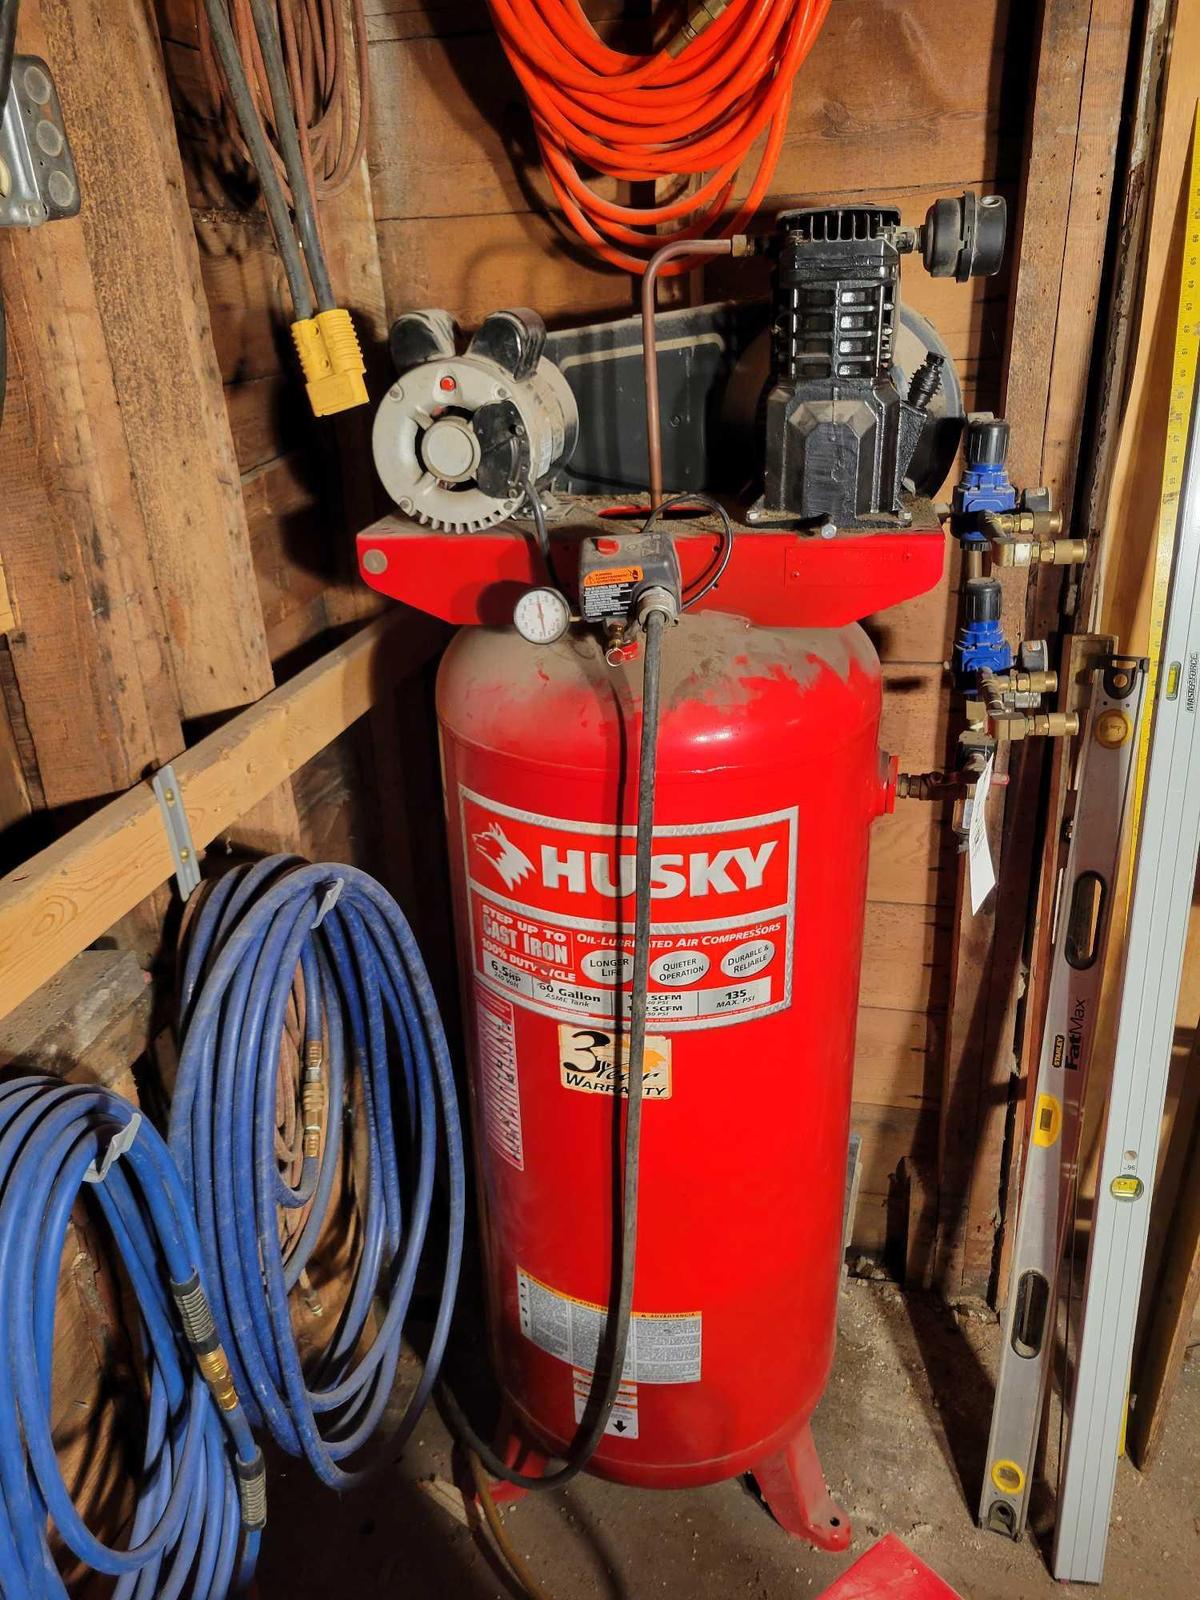 Husky 60gal 6.5hp 135 max psi single phase air compressor with hoses and accessories